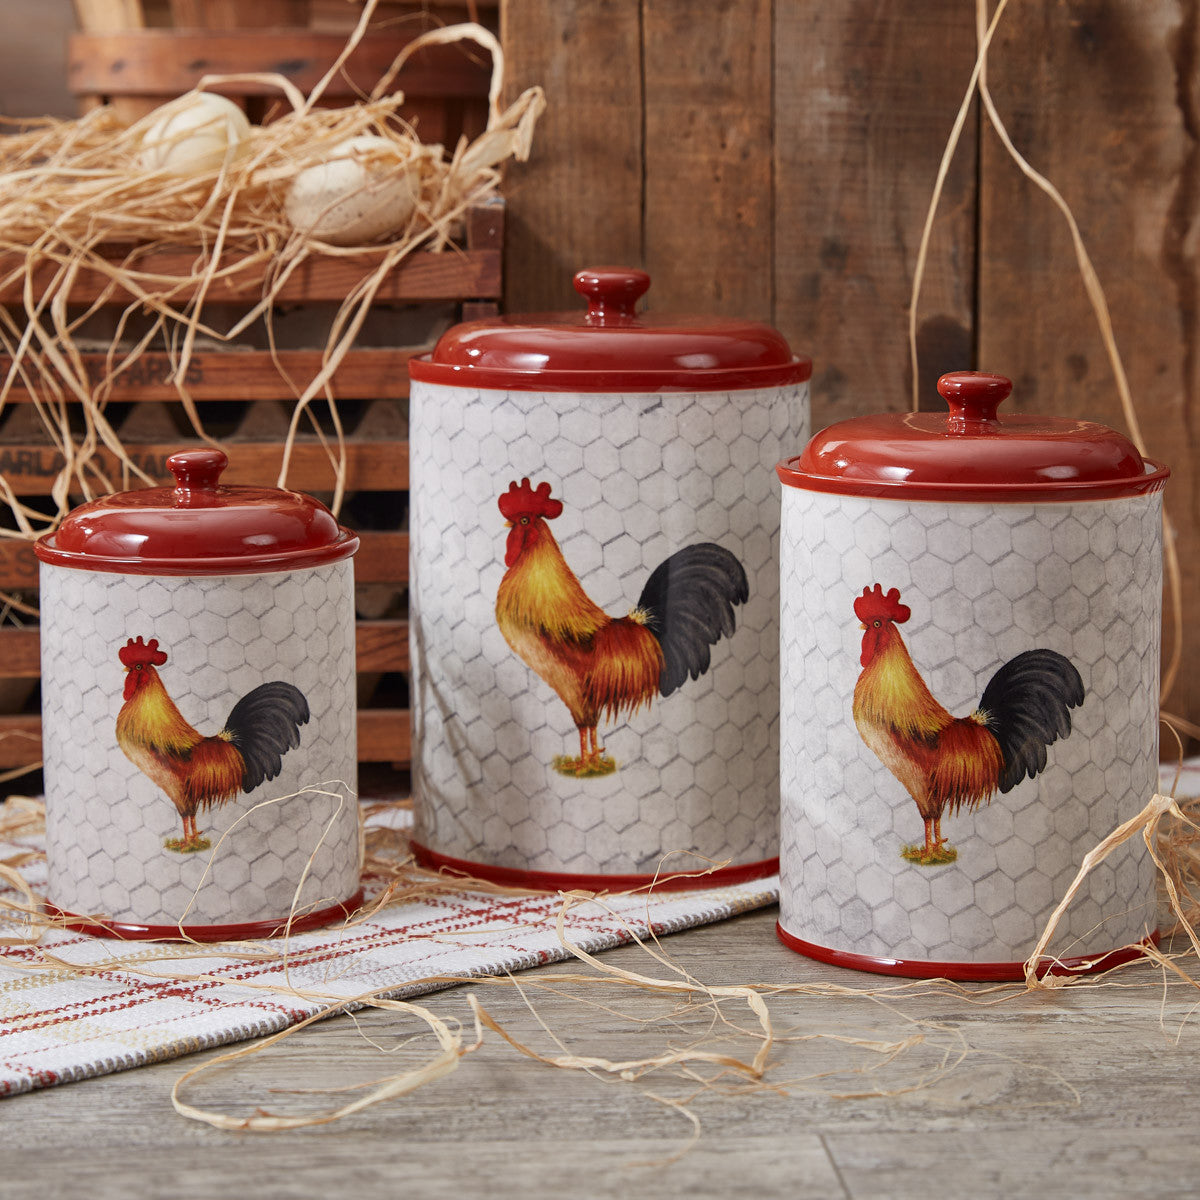 Park Designs Farmhouse Primitive Rooster Canisters Set of 3 Excellent Quality Free Shipping